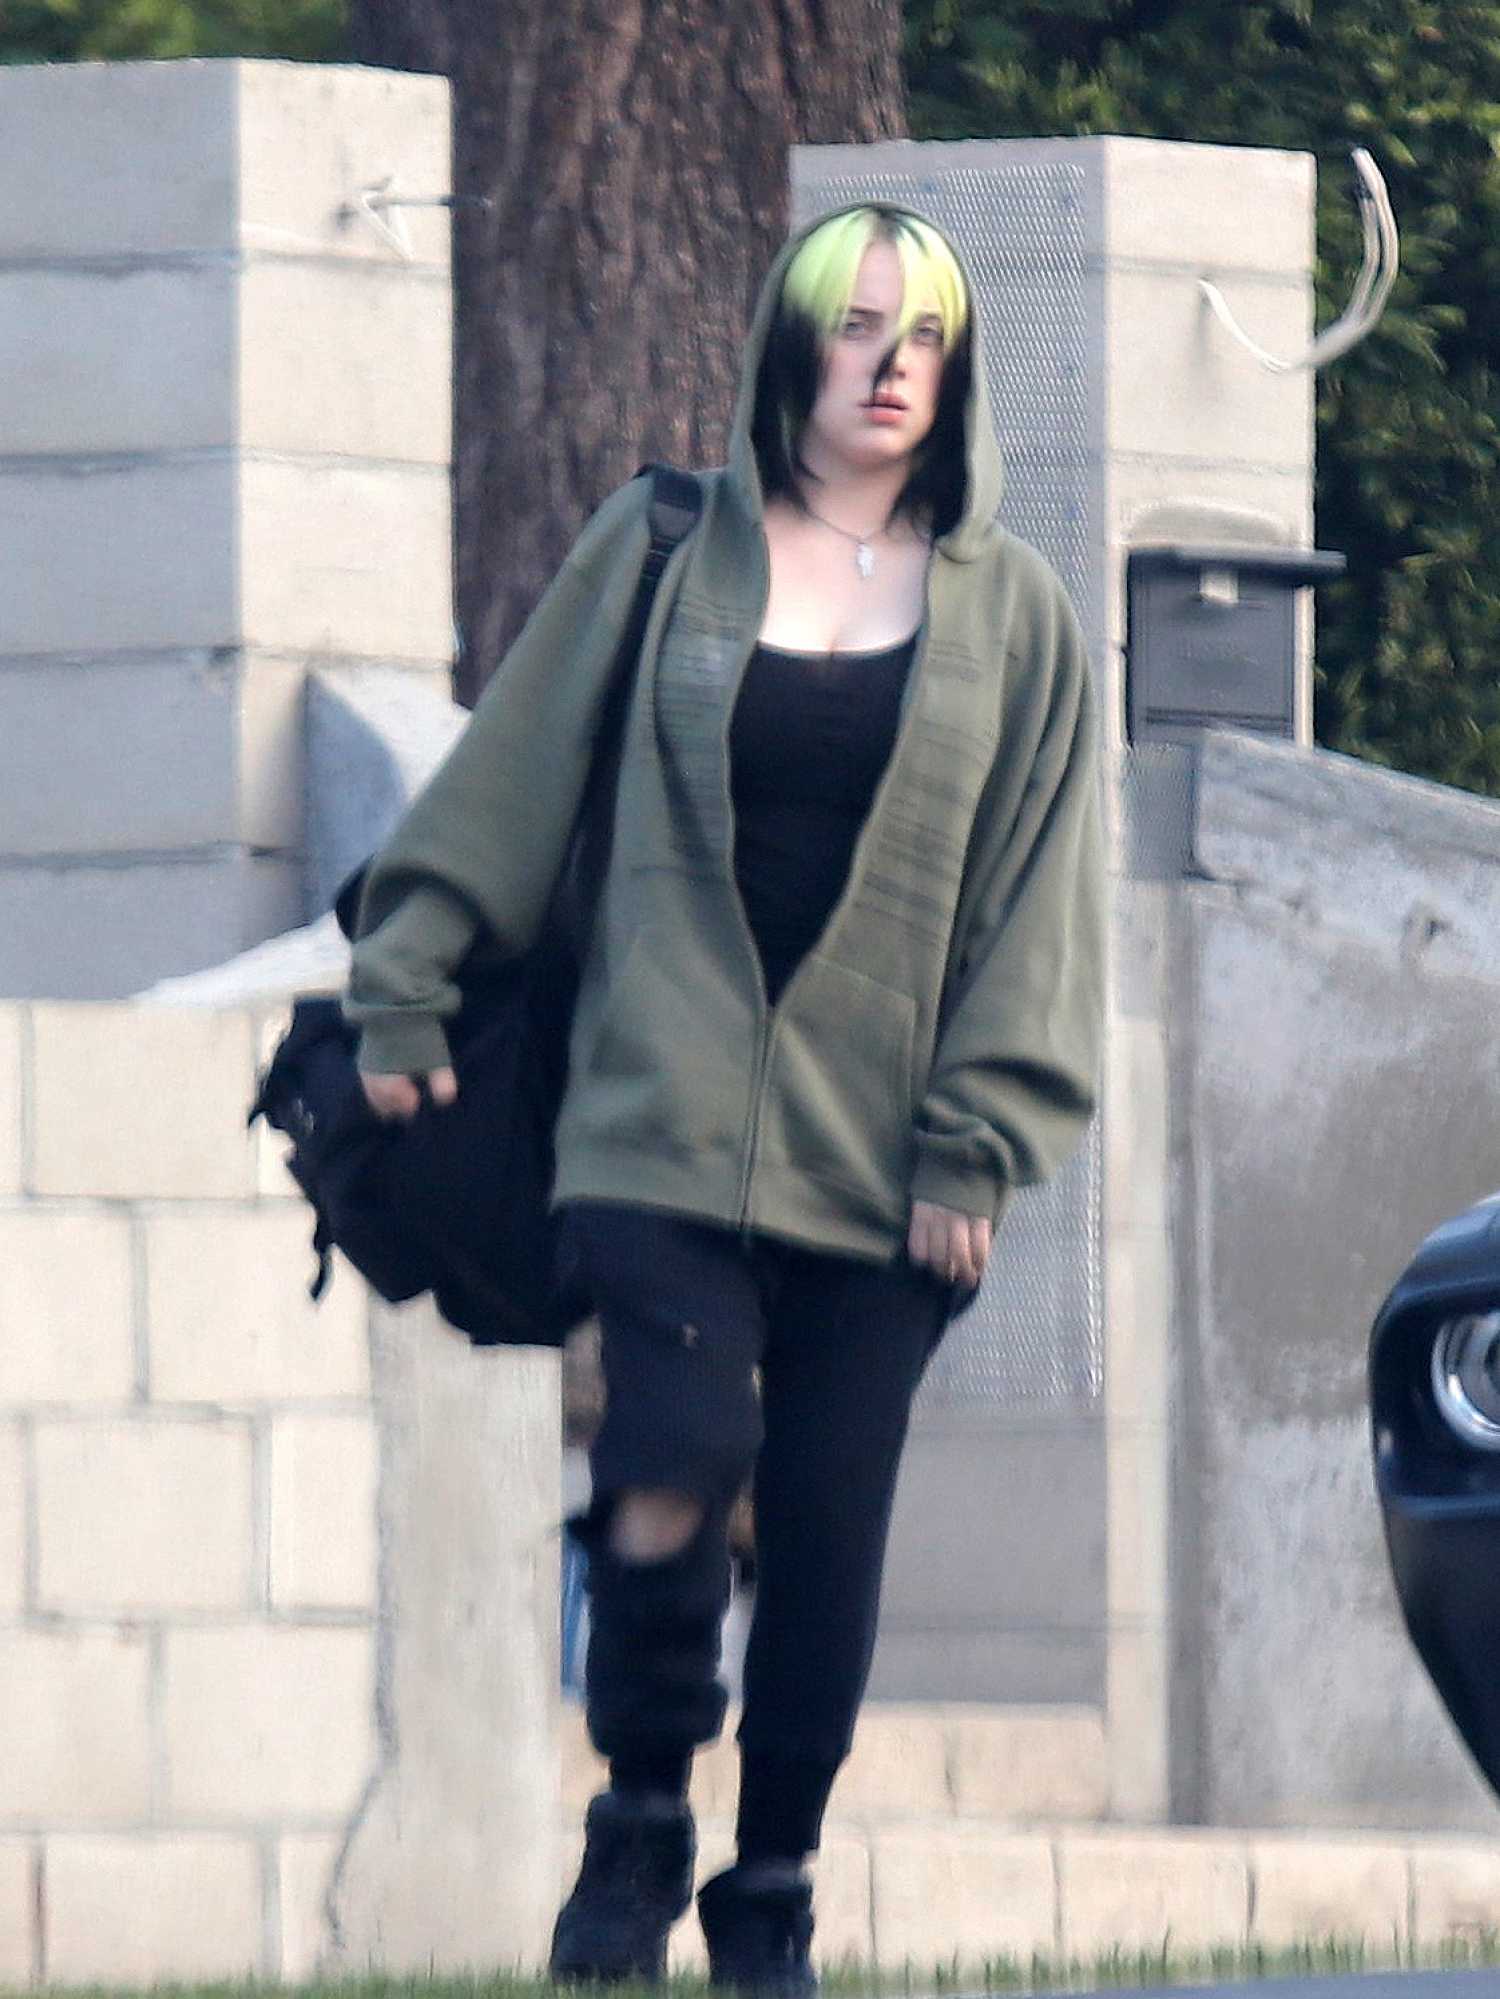 Billie Eilish in a Black Ripped Jeans Was Seen Out with Her Brother in